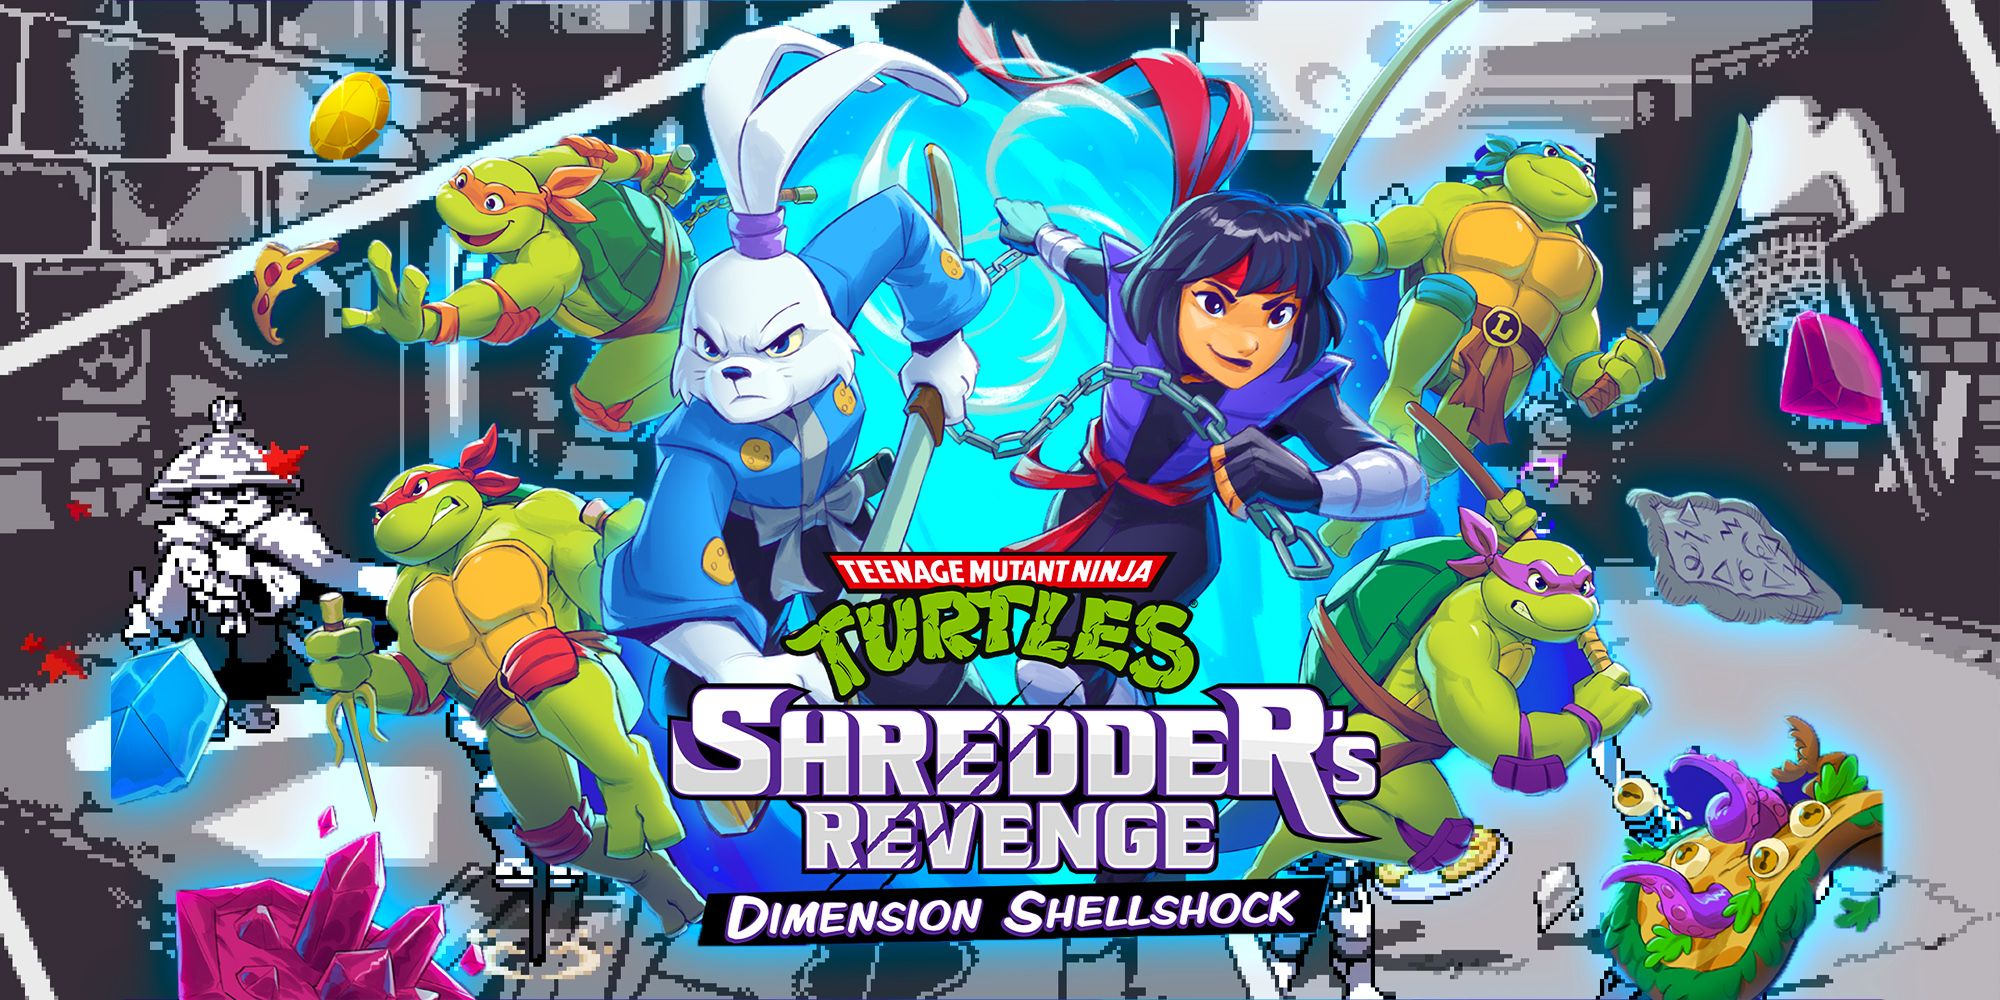 Key art for the upcoming TMNT: Shredder's Revenge DLC, showing the four turtles and the expansion's two new characters, Miyamoto Usagi and Karai, all coming out of a colorful portal on a black and white background. The DLC's text logo is centered at the bottom of the frame.